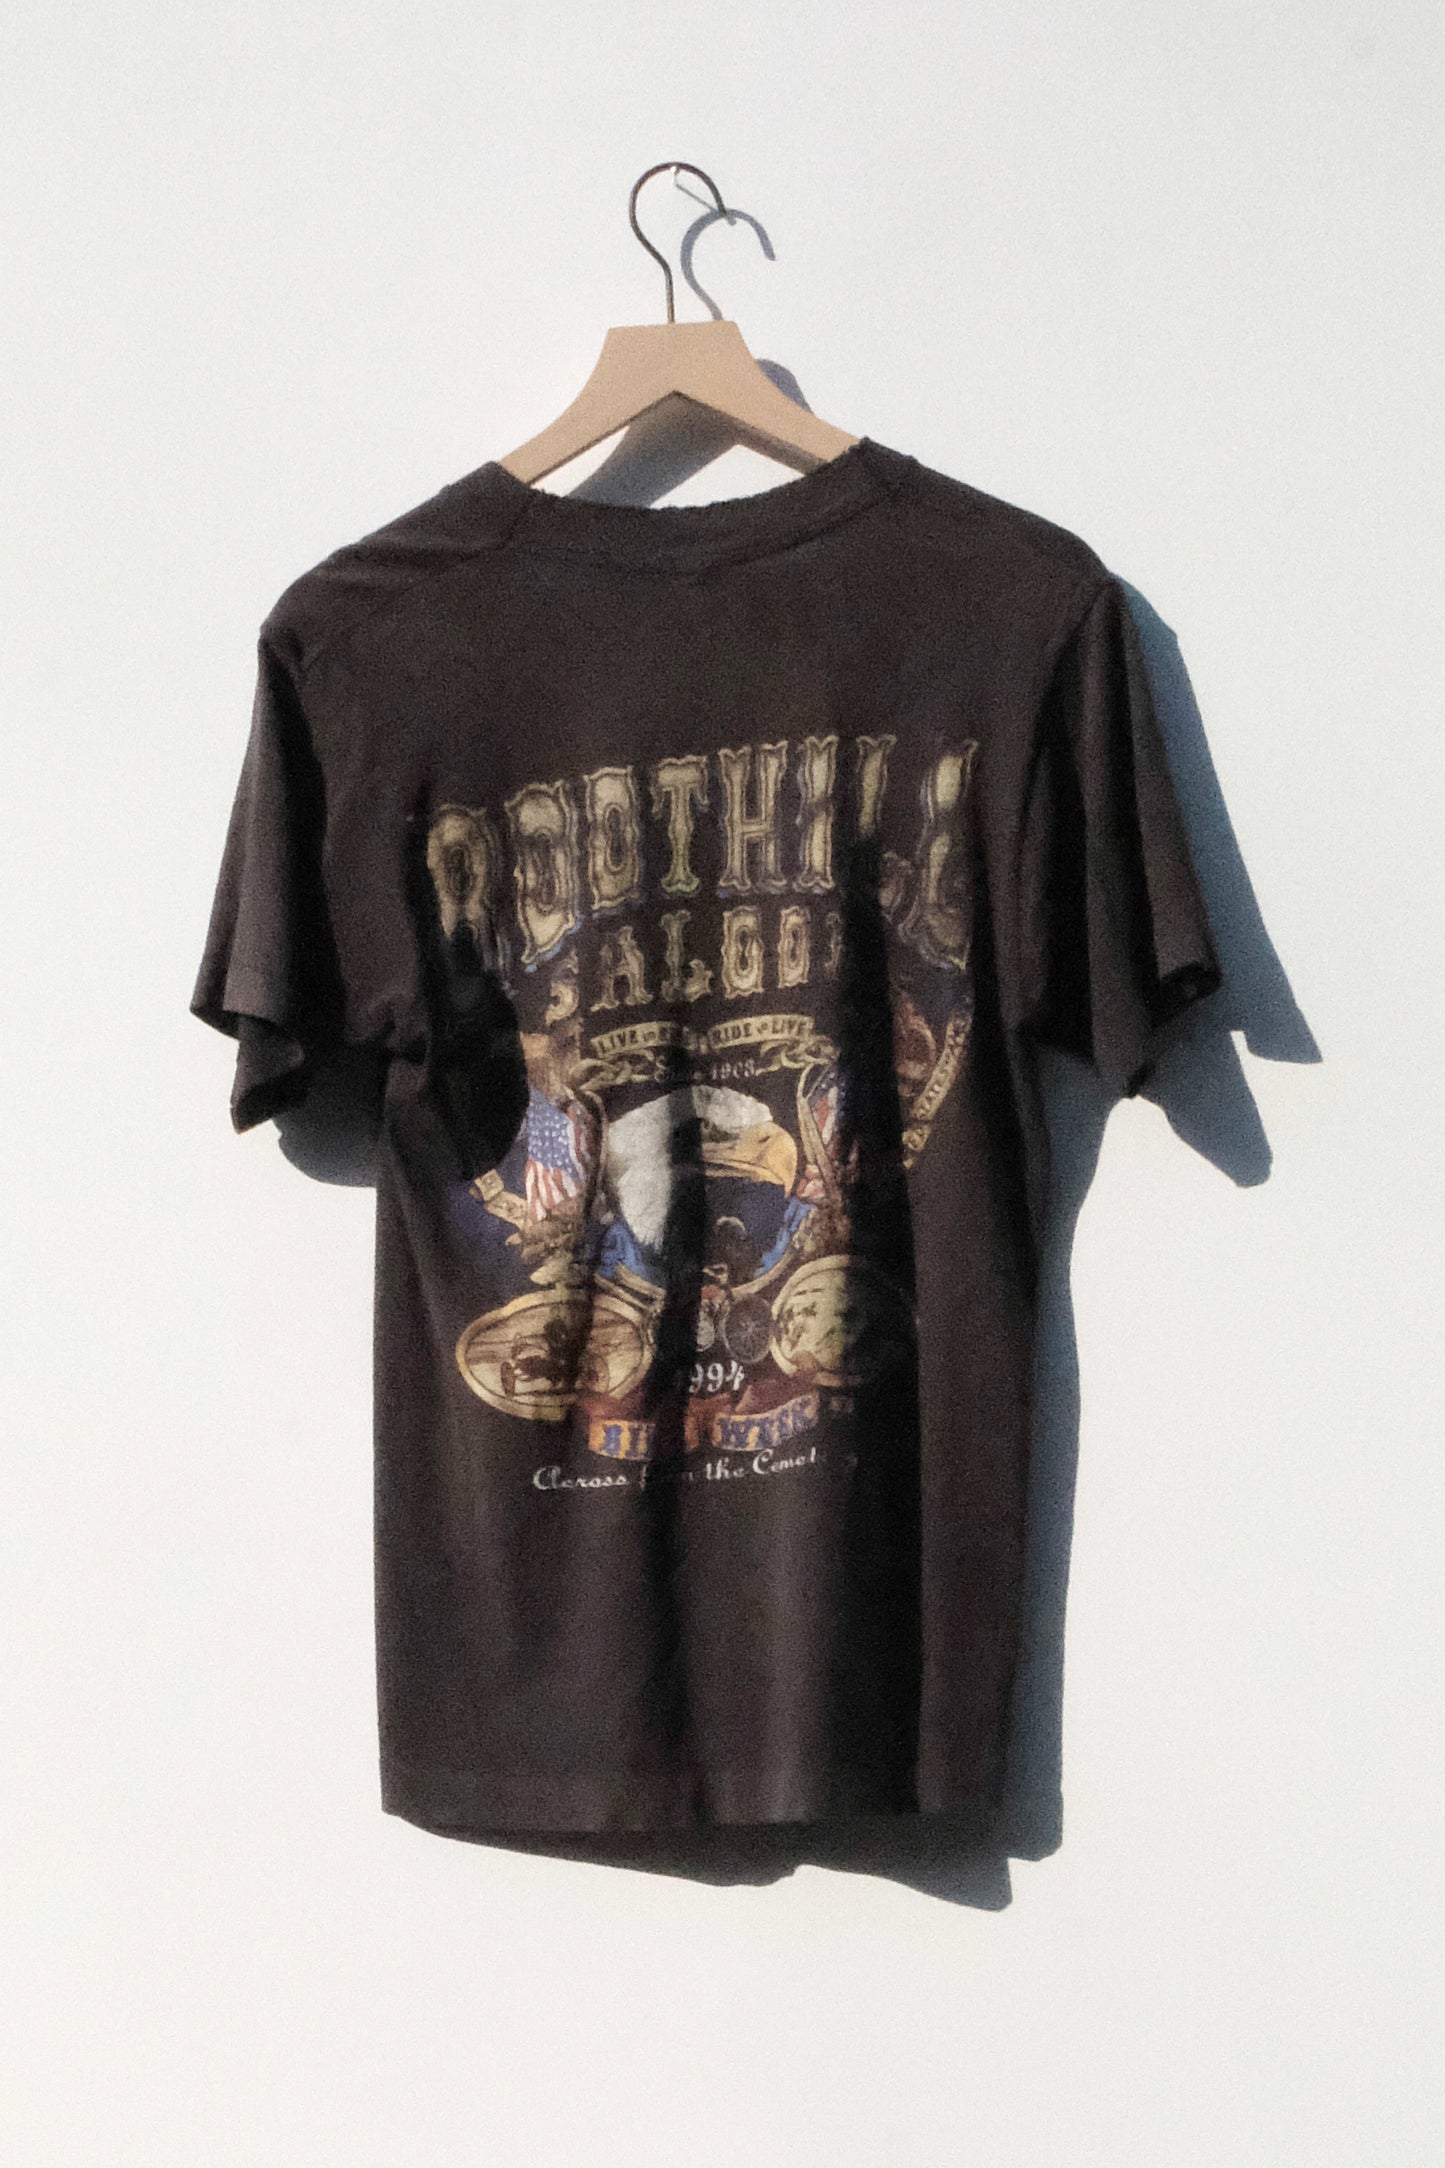 Boothill Saloon Vintage T-Shirt, 90's US 6